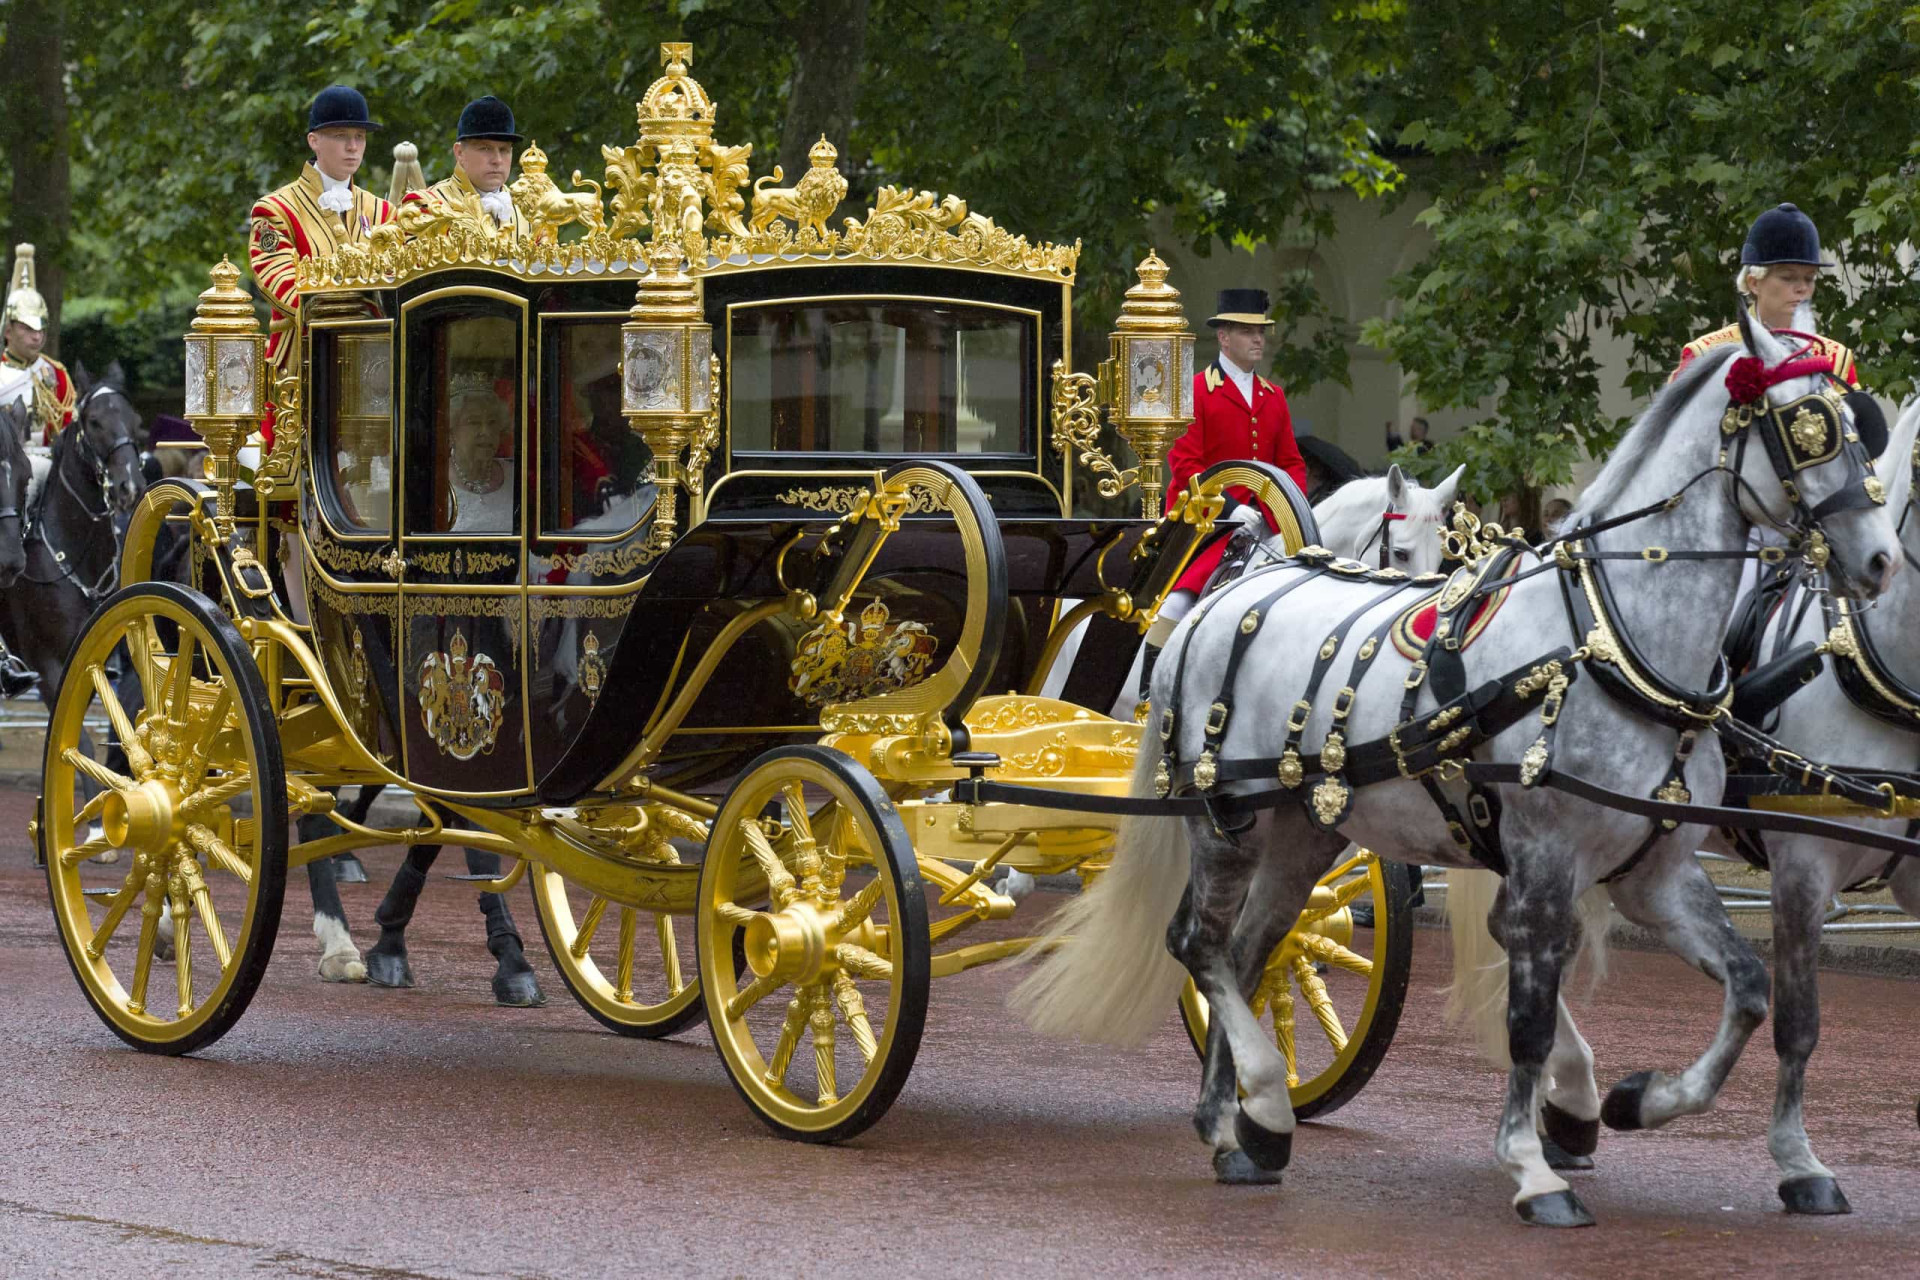 <p>Originally known as State Coach Britannia and made to commemorate Queen Elizabeth II's 80th birthday, the Diamond Jubilee State Coach was renamed after its production was delayed, its eventual inauguration coinciding with the Diamond Jubilee celebrations in 2012. It's since be used for the State Opening of Parliament and for state visits.</p><p>You may also like:<a href="https://www.starsinsider.com/n/345054?utm_source=msn.com&utm_medium=display&utm_campaign=referral_description&utm_content=516219v1en-us"> Celebrities who became mothers after 40</a></p>